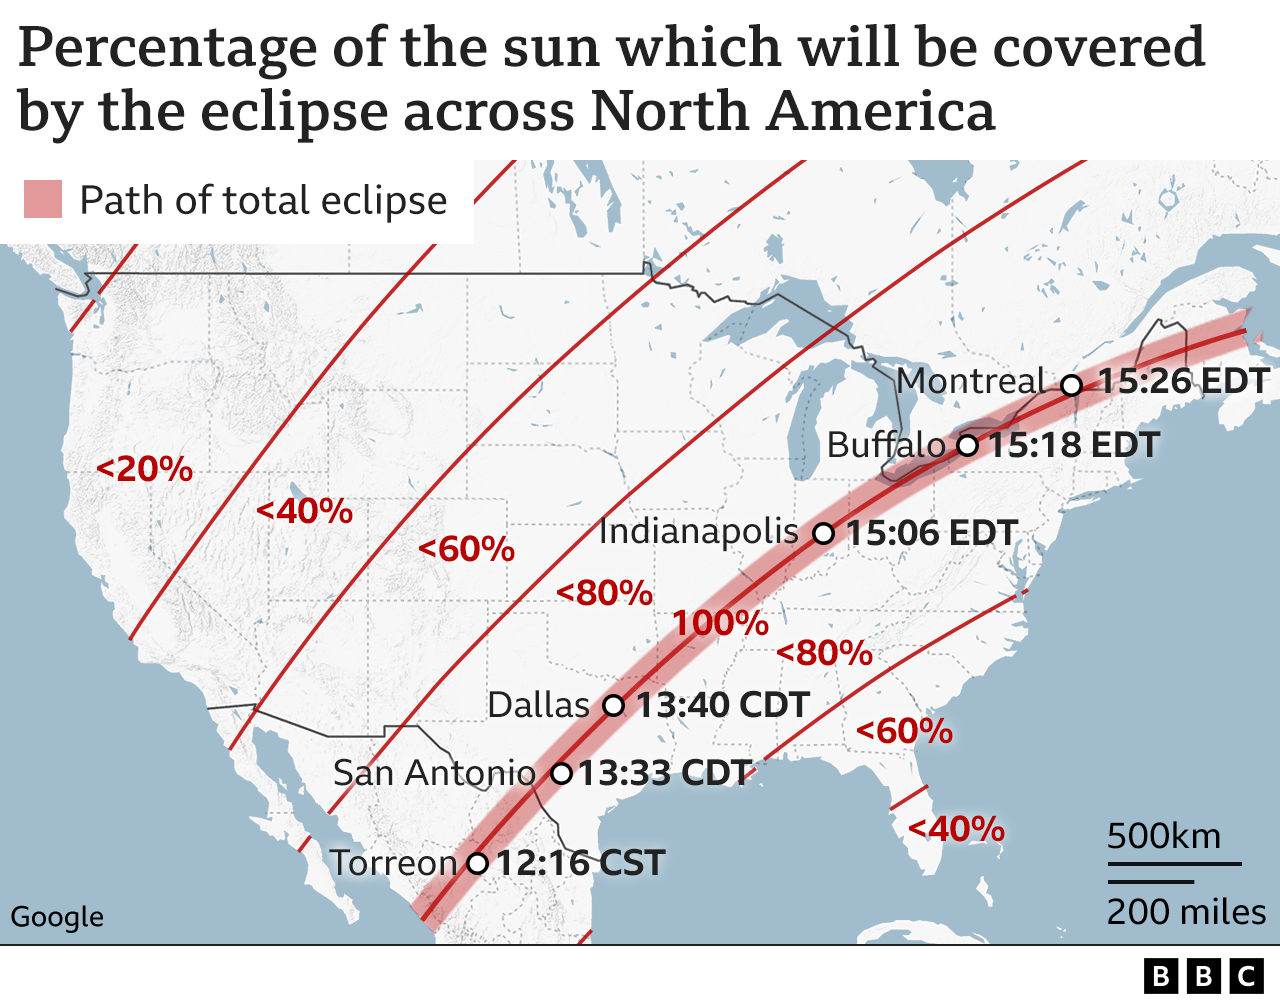 A BBC map of North America showing the path of totality, marking locations of Torreon, San Antonio, Dallas, Indianapolis and Montreal. The map is titled "percentage of the Sun which will be covered by the eclipse across North America. The map also reveals that, either side of the line of totality, certain locations will receive a partial eclipse